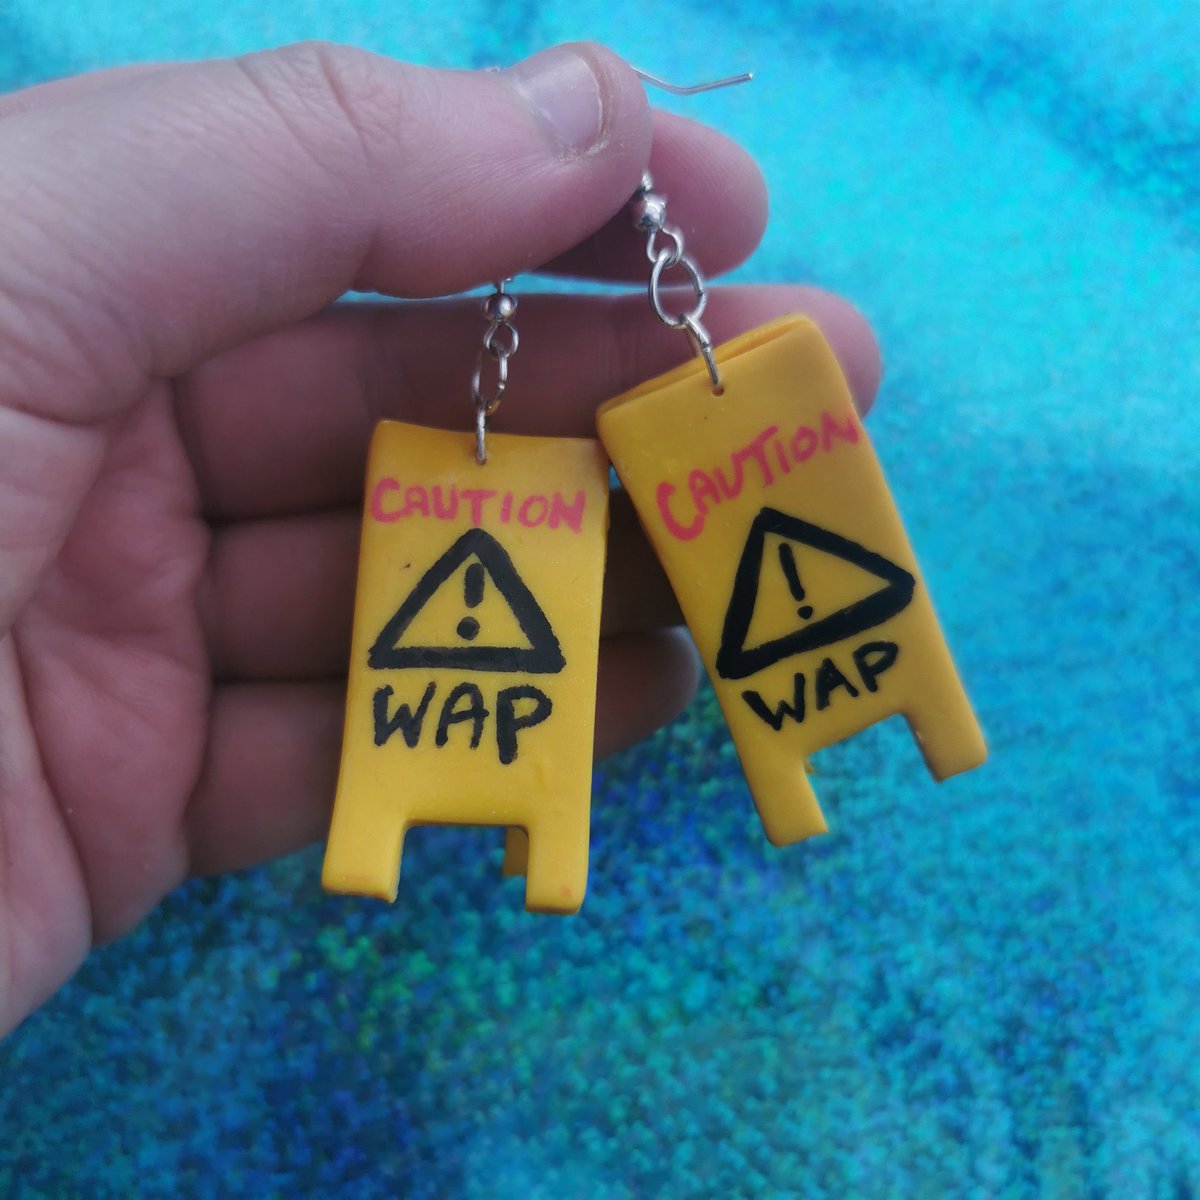 From  http://westqueerart.com  there are some great value earrings, stickers & prints. The designs are modern, unique & eye catching. Sharon Nolan is based in Galway & has an idiosyncratic eye for unique jewellery. #MadeInIreland  #SupportTheArts